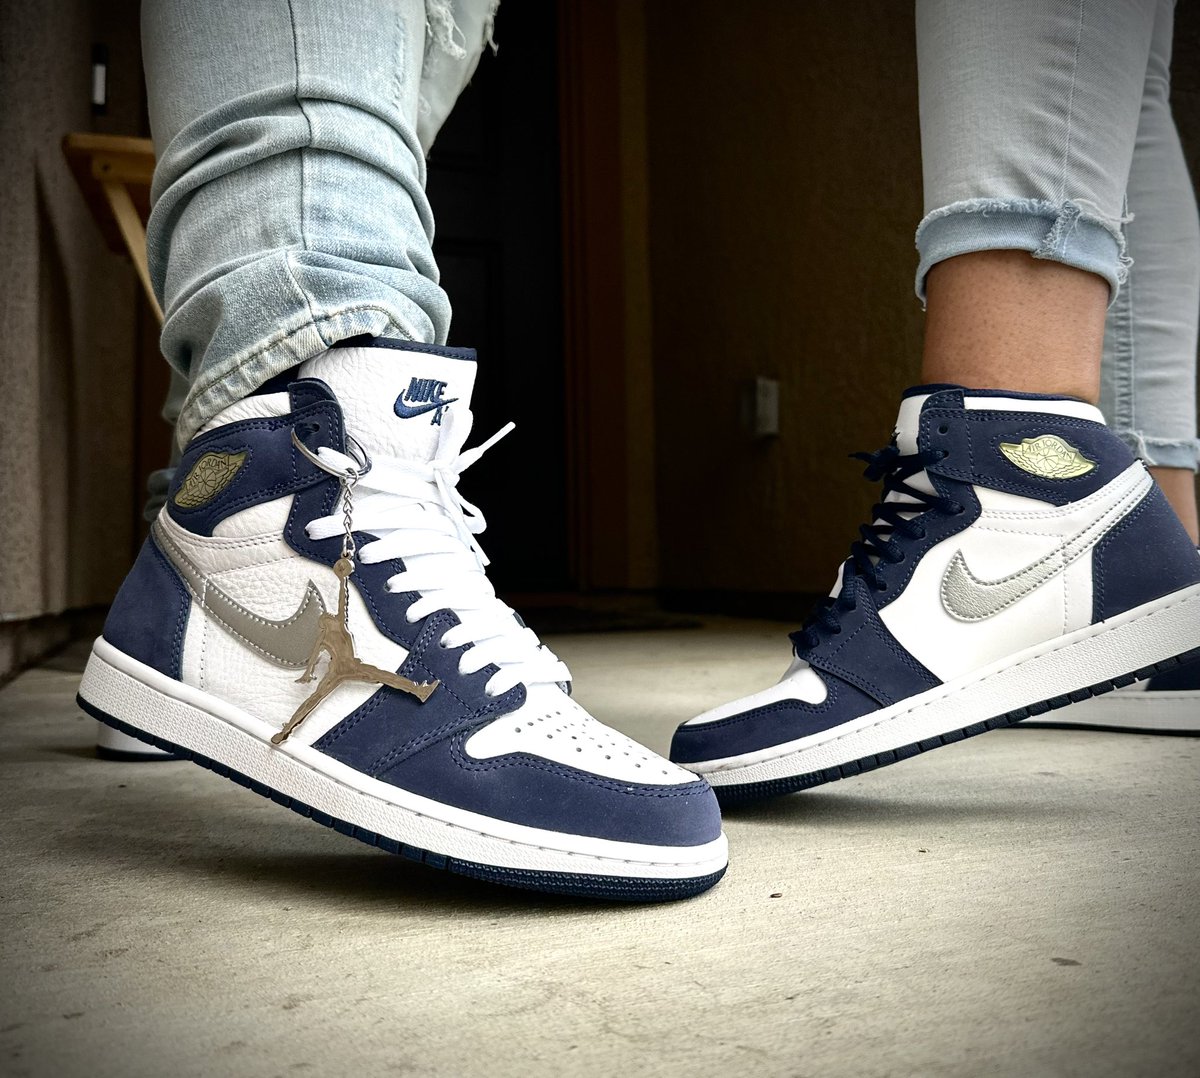 MidNite Navy collab with the wife😍 for the #weekofjordan1high challenge 🙌🏾🙌🏾🙌🏾.. you wearing them jays well babe😘..#jordan1 
 #kotd #thesolefirm #stilllaceddifferently #snkrskliveheatingup
#solecollectors #snkrskickcheck #MillerApproved #sneakerwifey #snkrliveheatingup